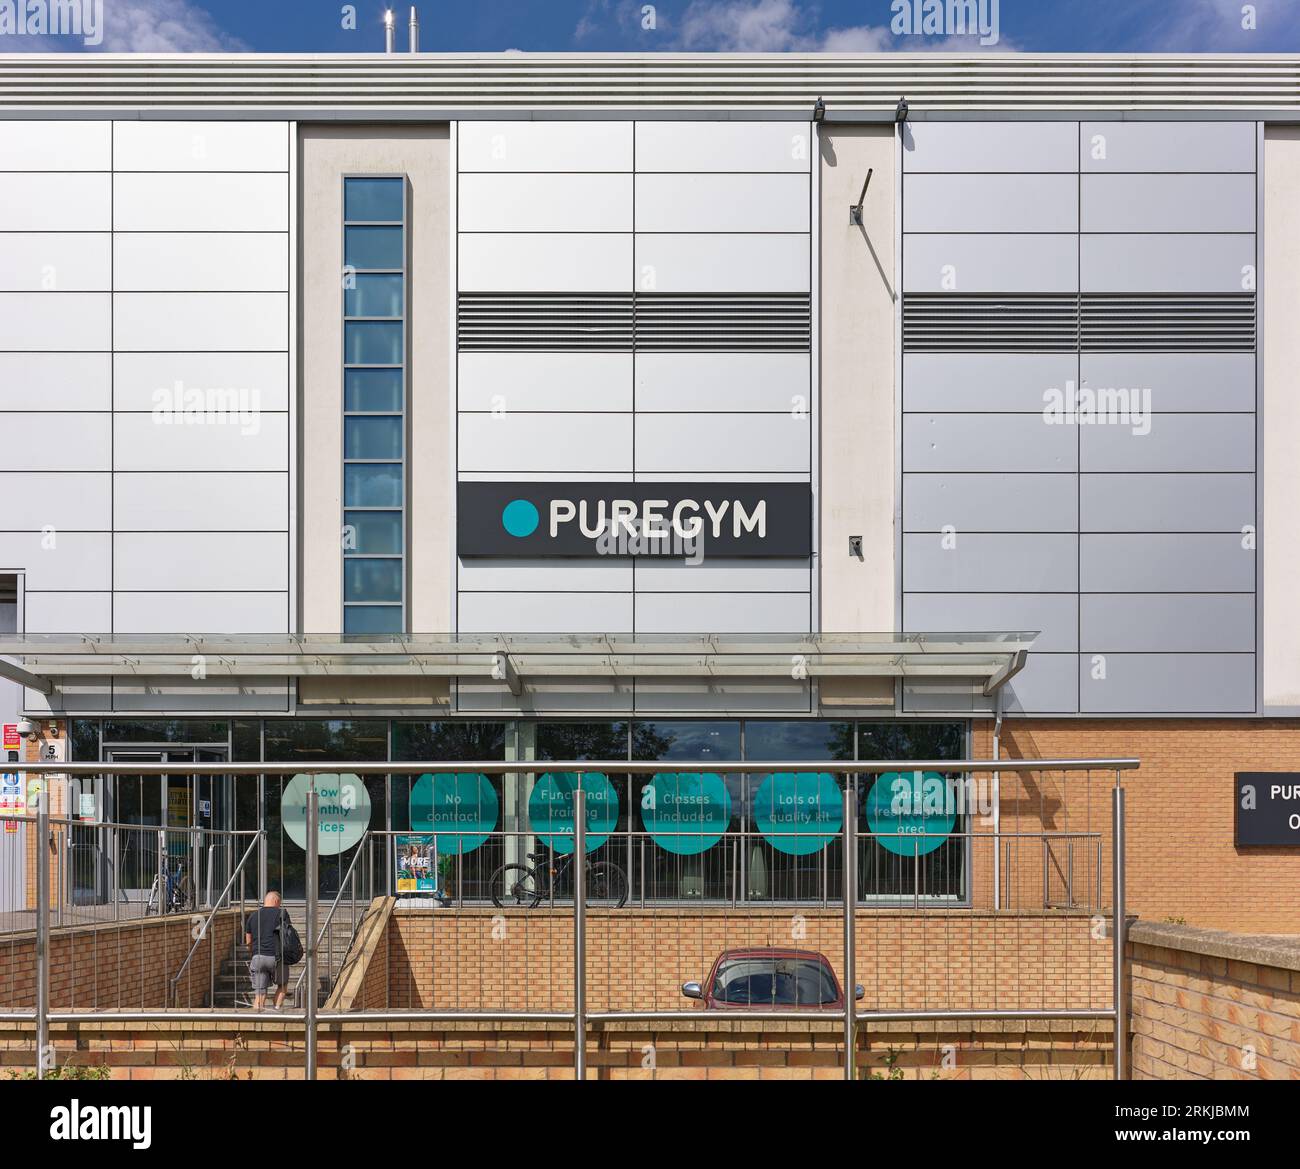 Puregym a Corby, Inghilterra. Foto Stock